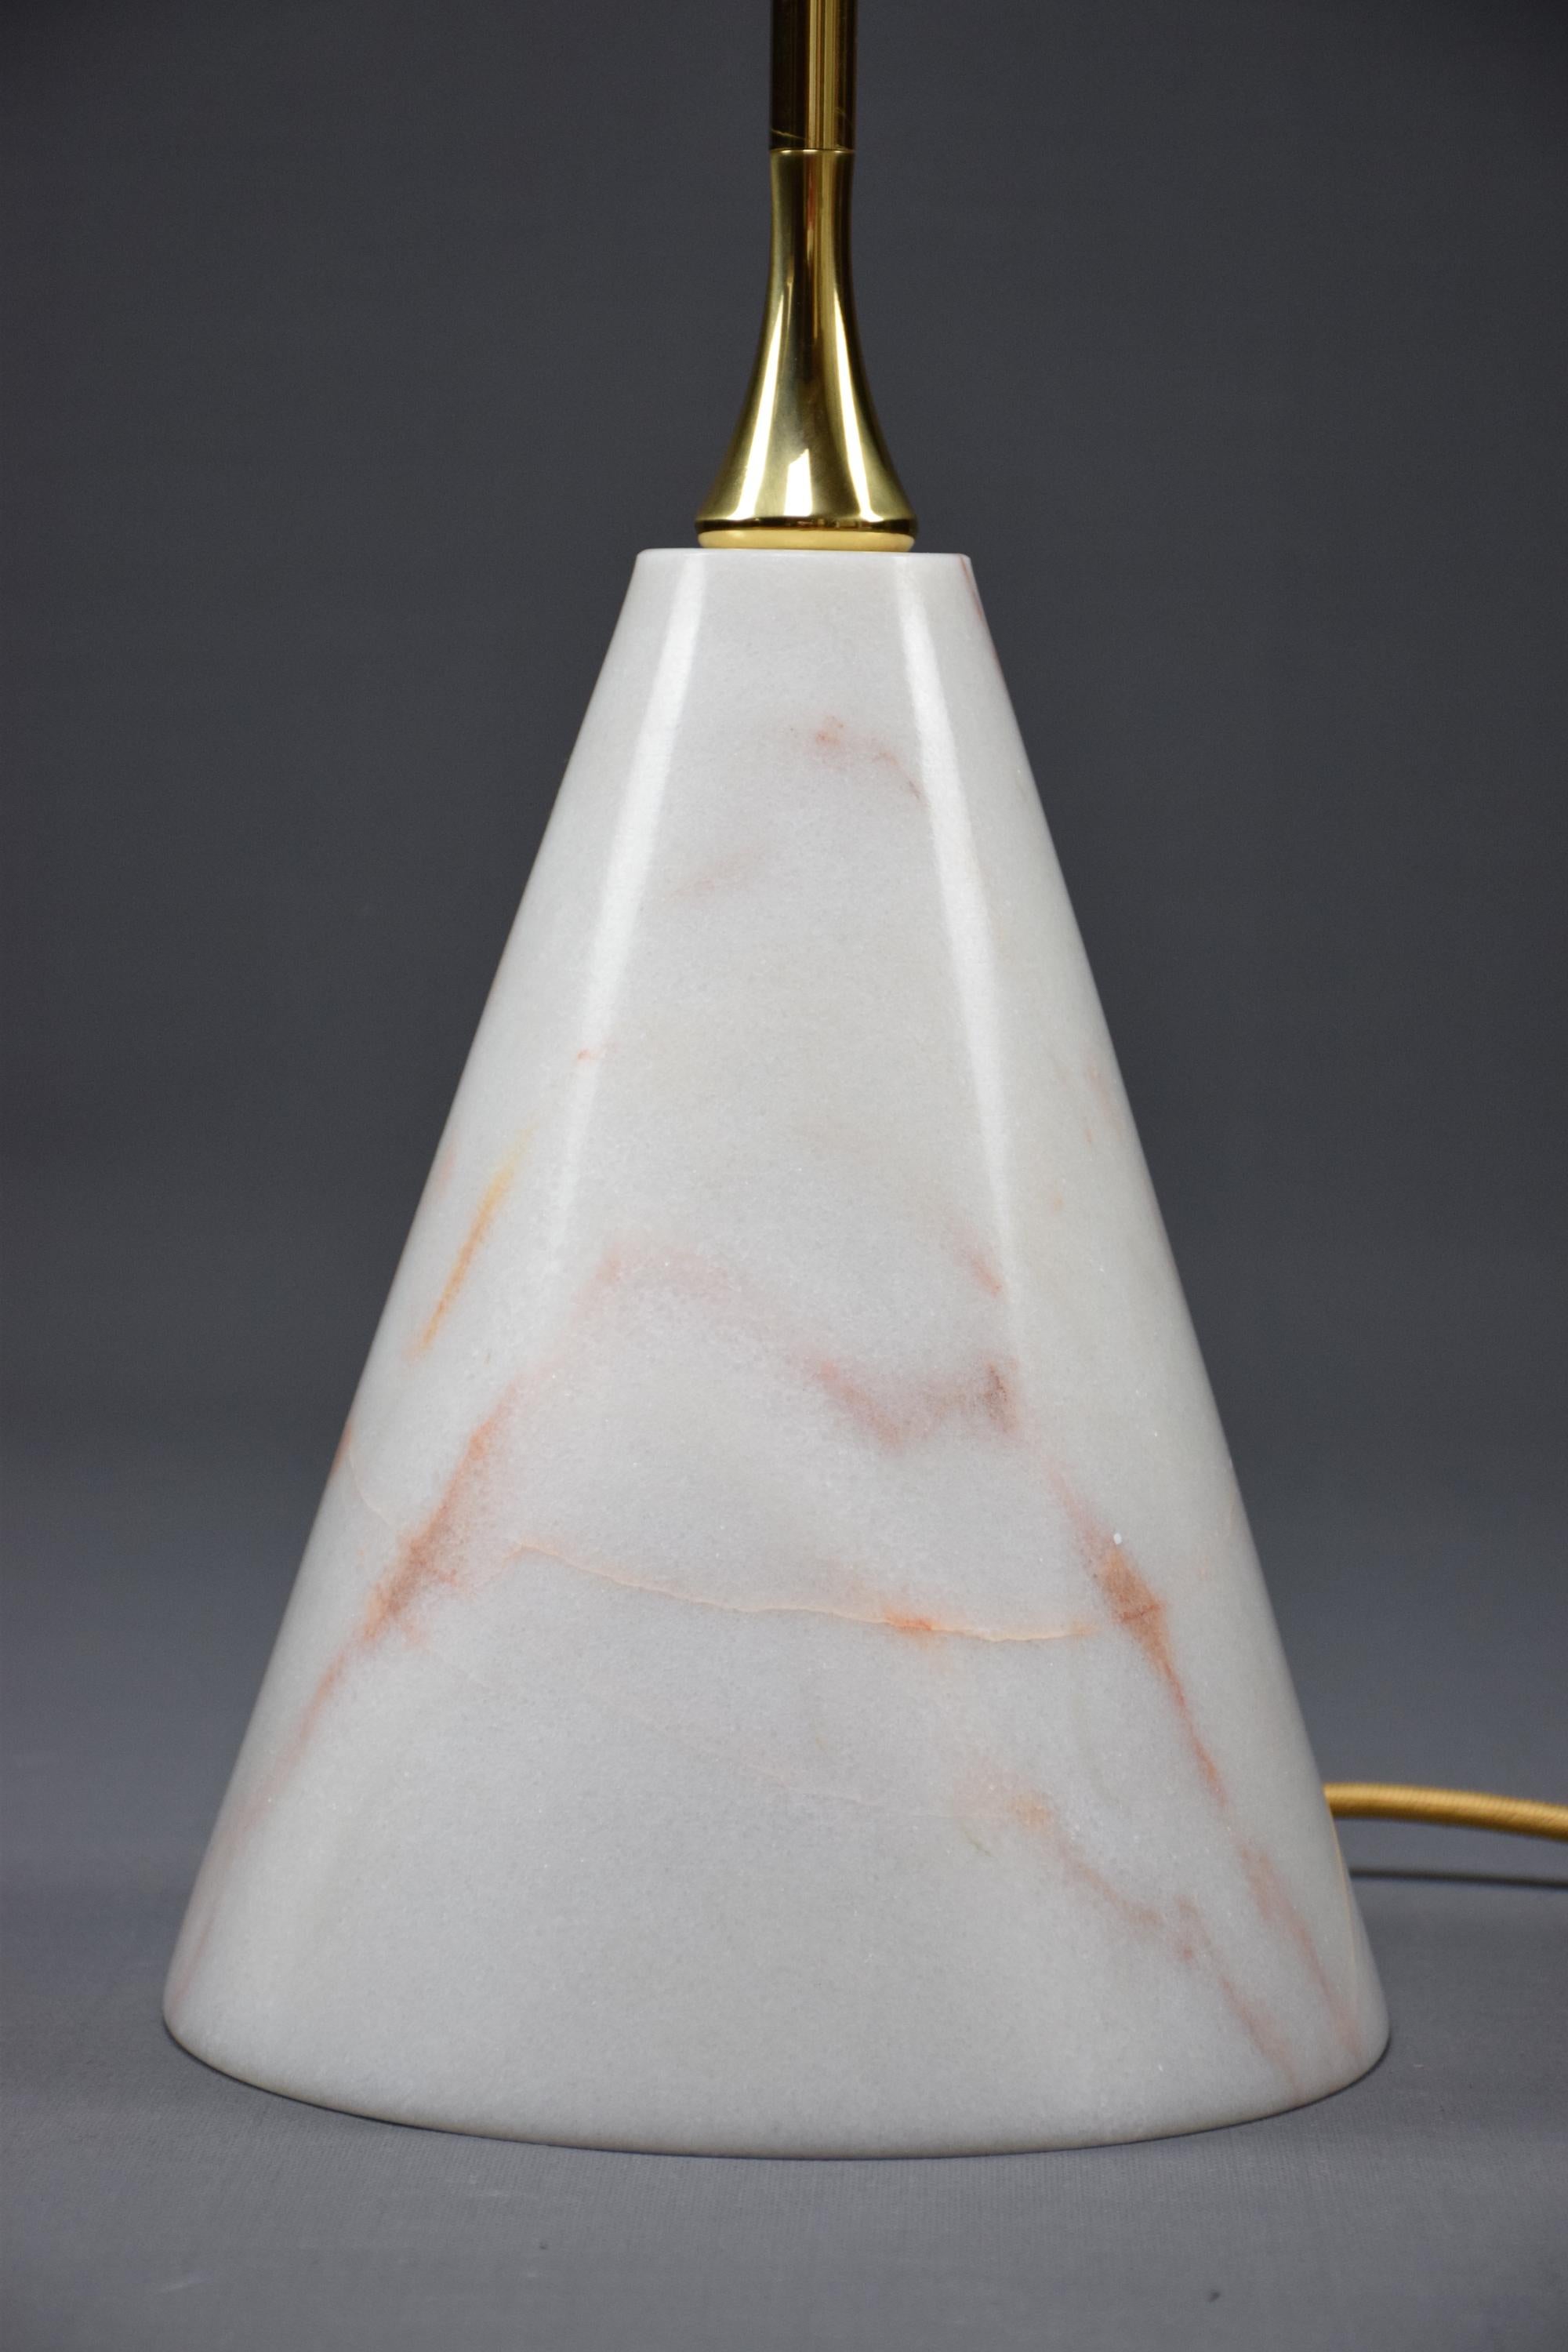 A model highlighted by its geometrically shaped hand blown glass shade which comes with a glass cylinder. The marble base is available in black, green or white.

Light source: 
1x60 W Max E27
230 V - LED integrated 
120 V - LED

The Flow